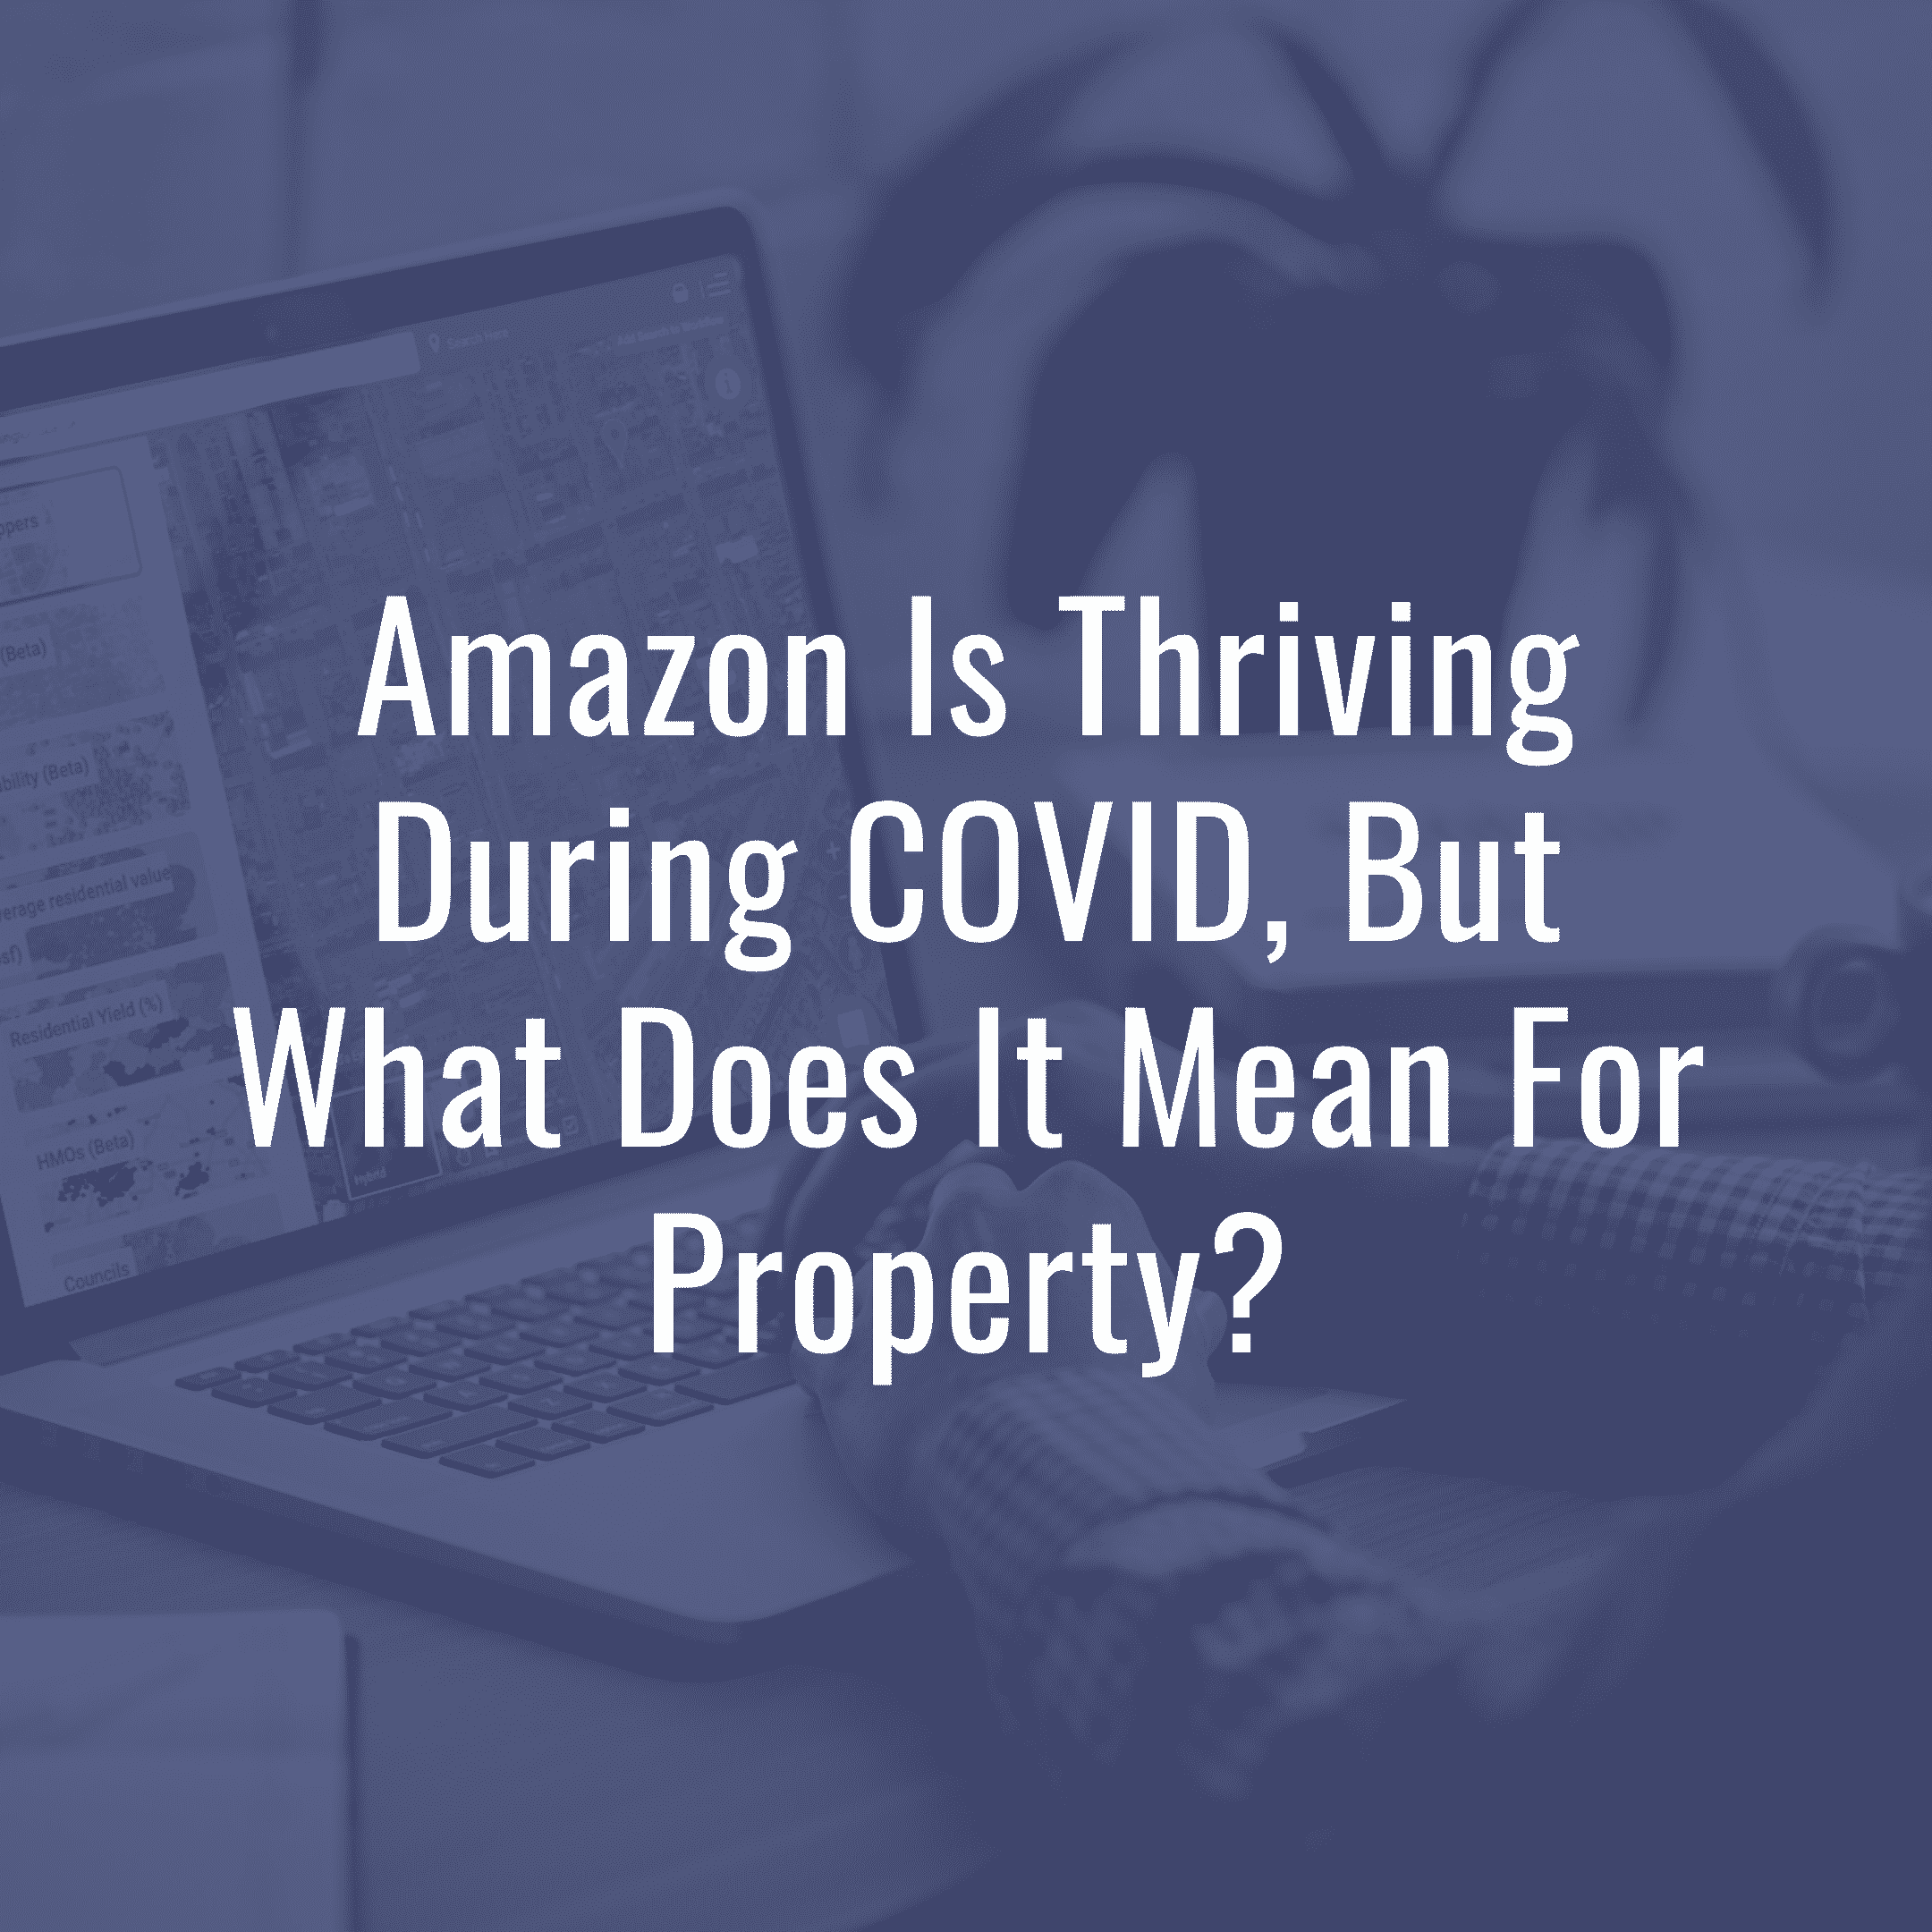 Amazon is thriving during COVID. What does it mean for property?